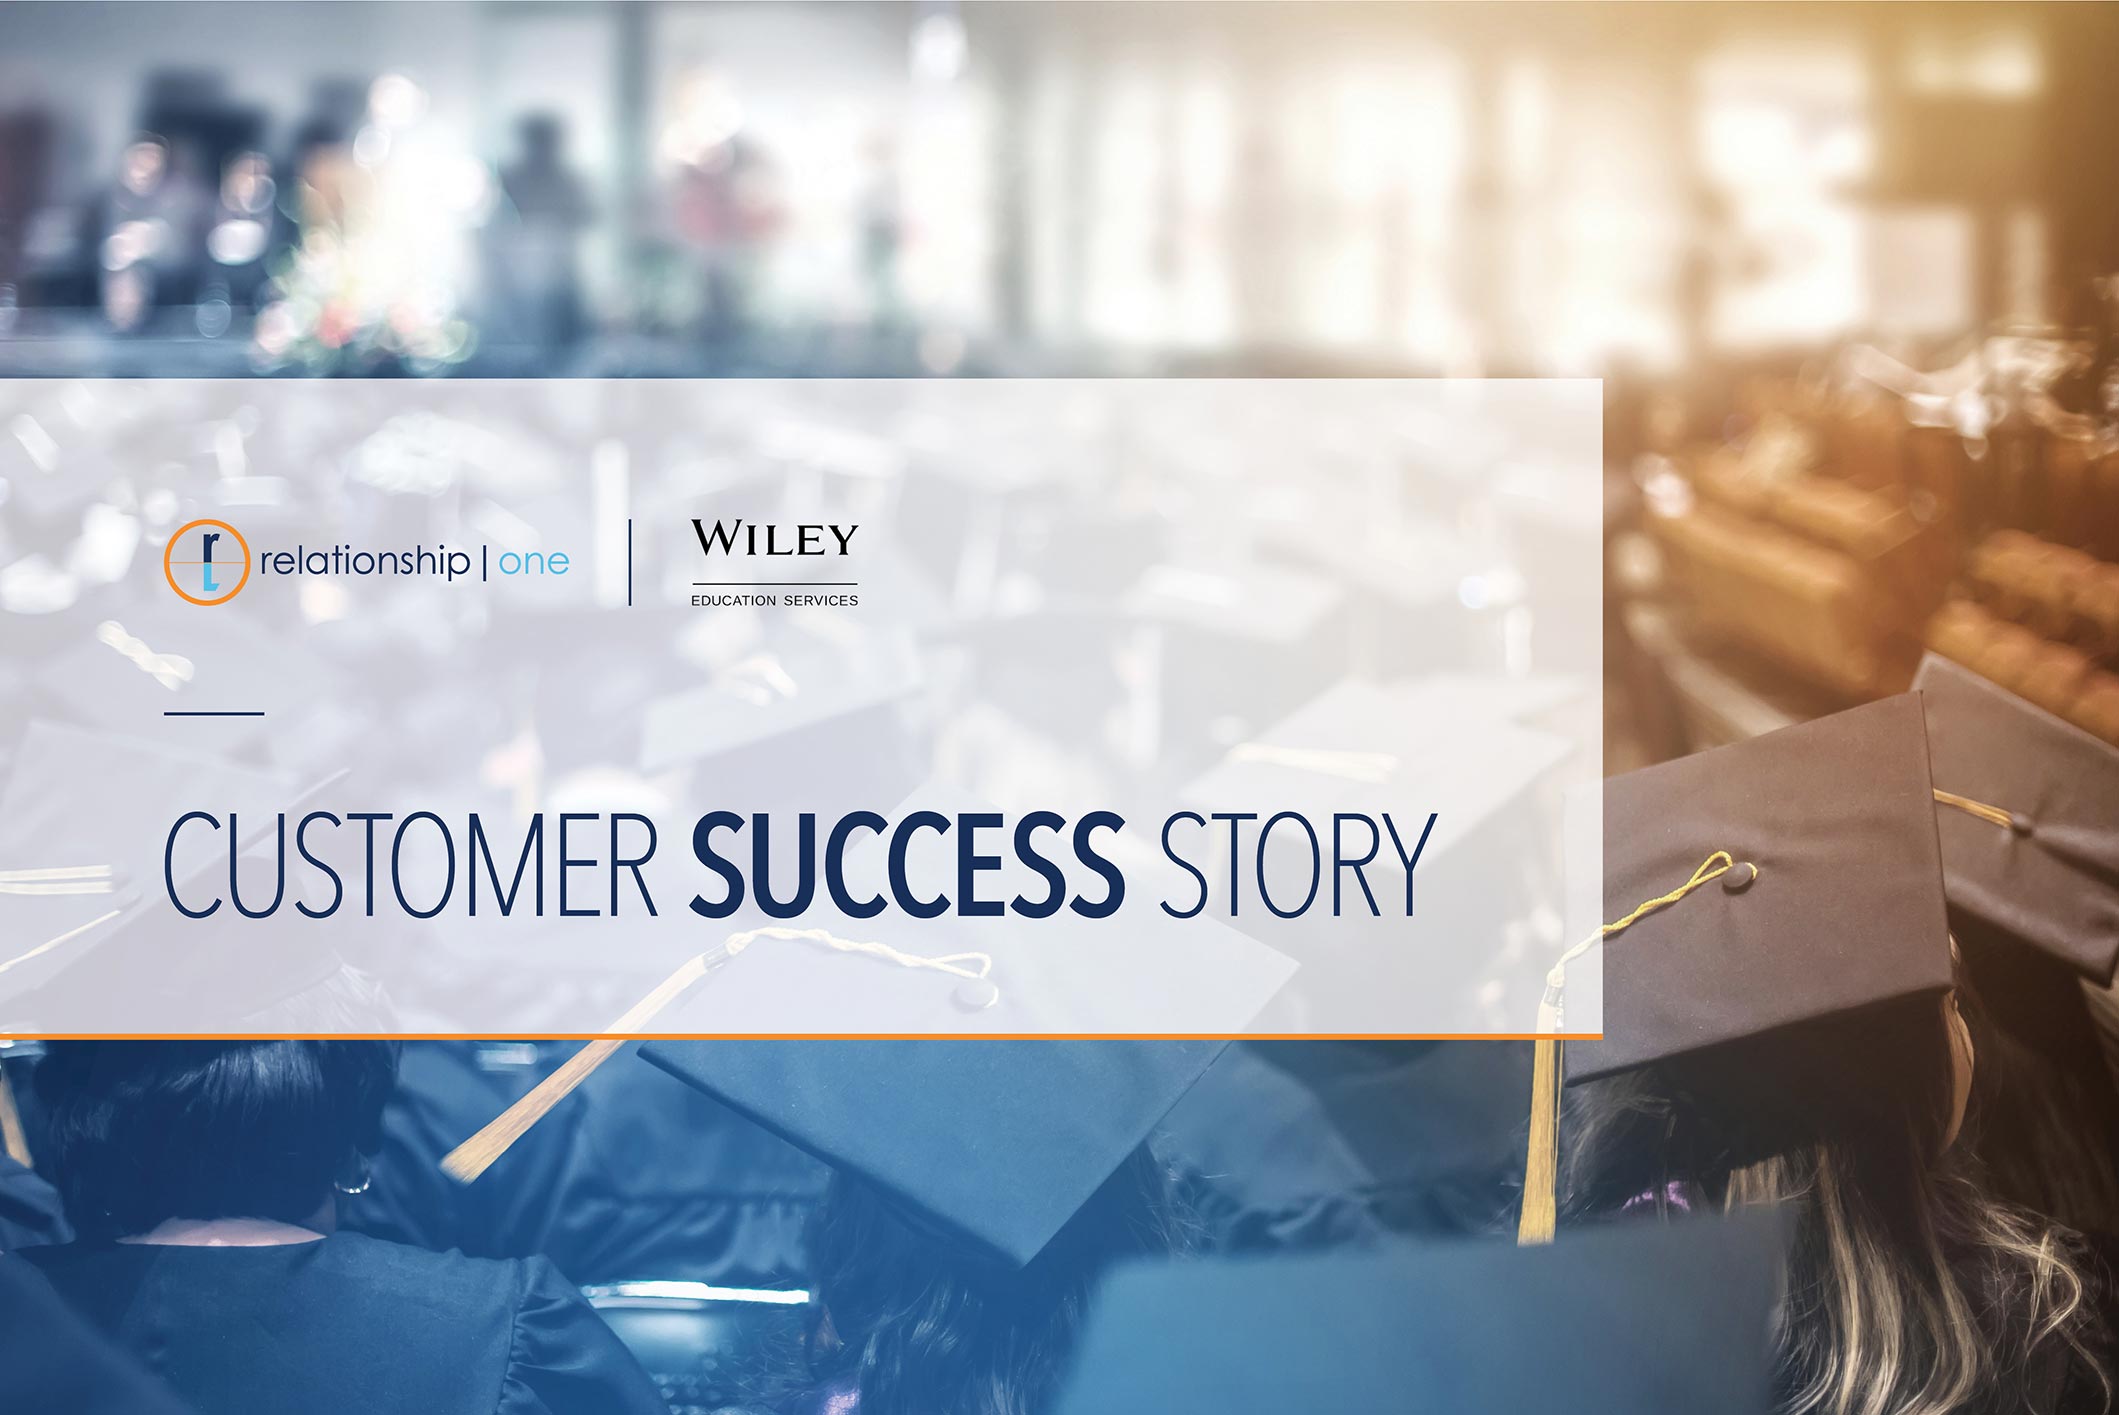 Customer Success Story: Wiley Education Services - Relationship One